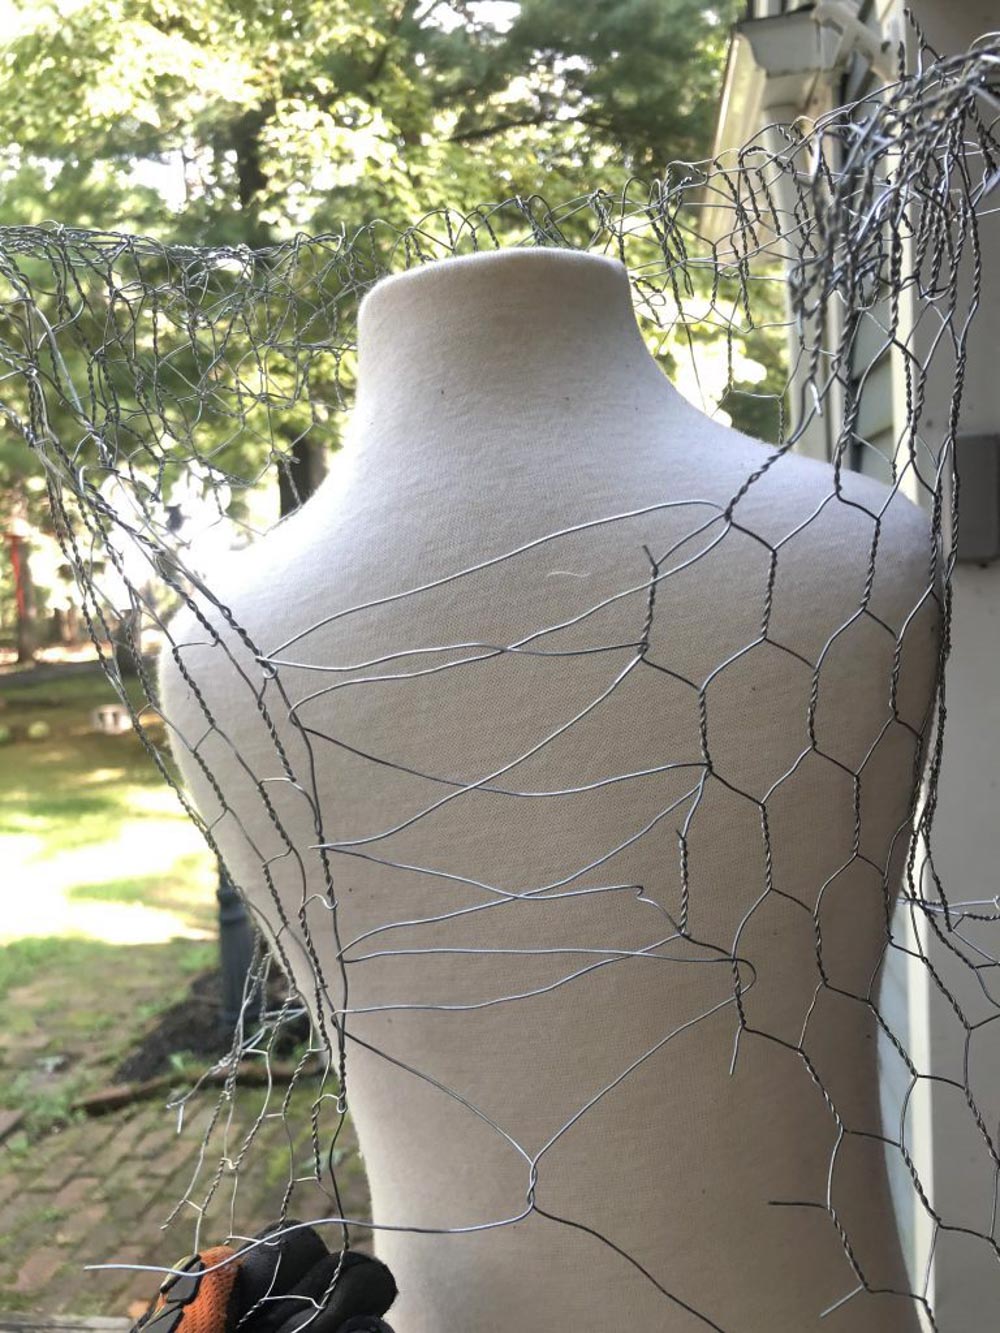 A mannequin wrapped in chicken wire.